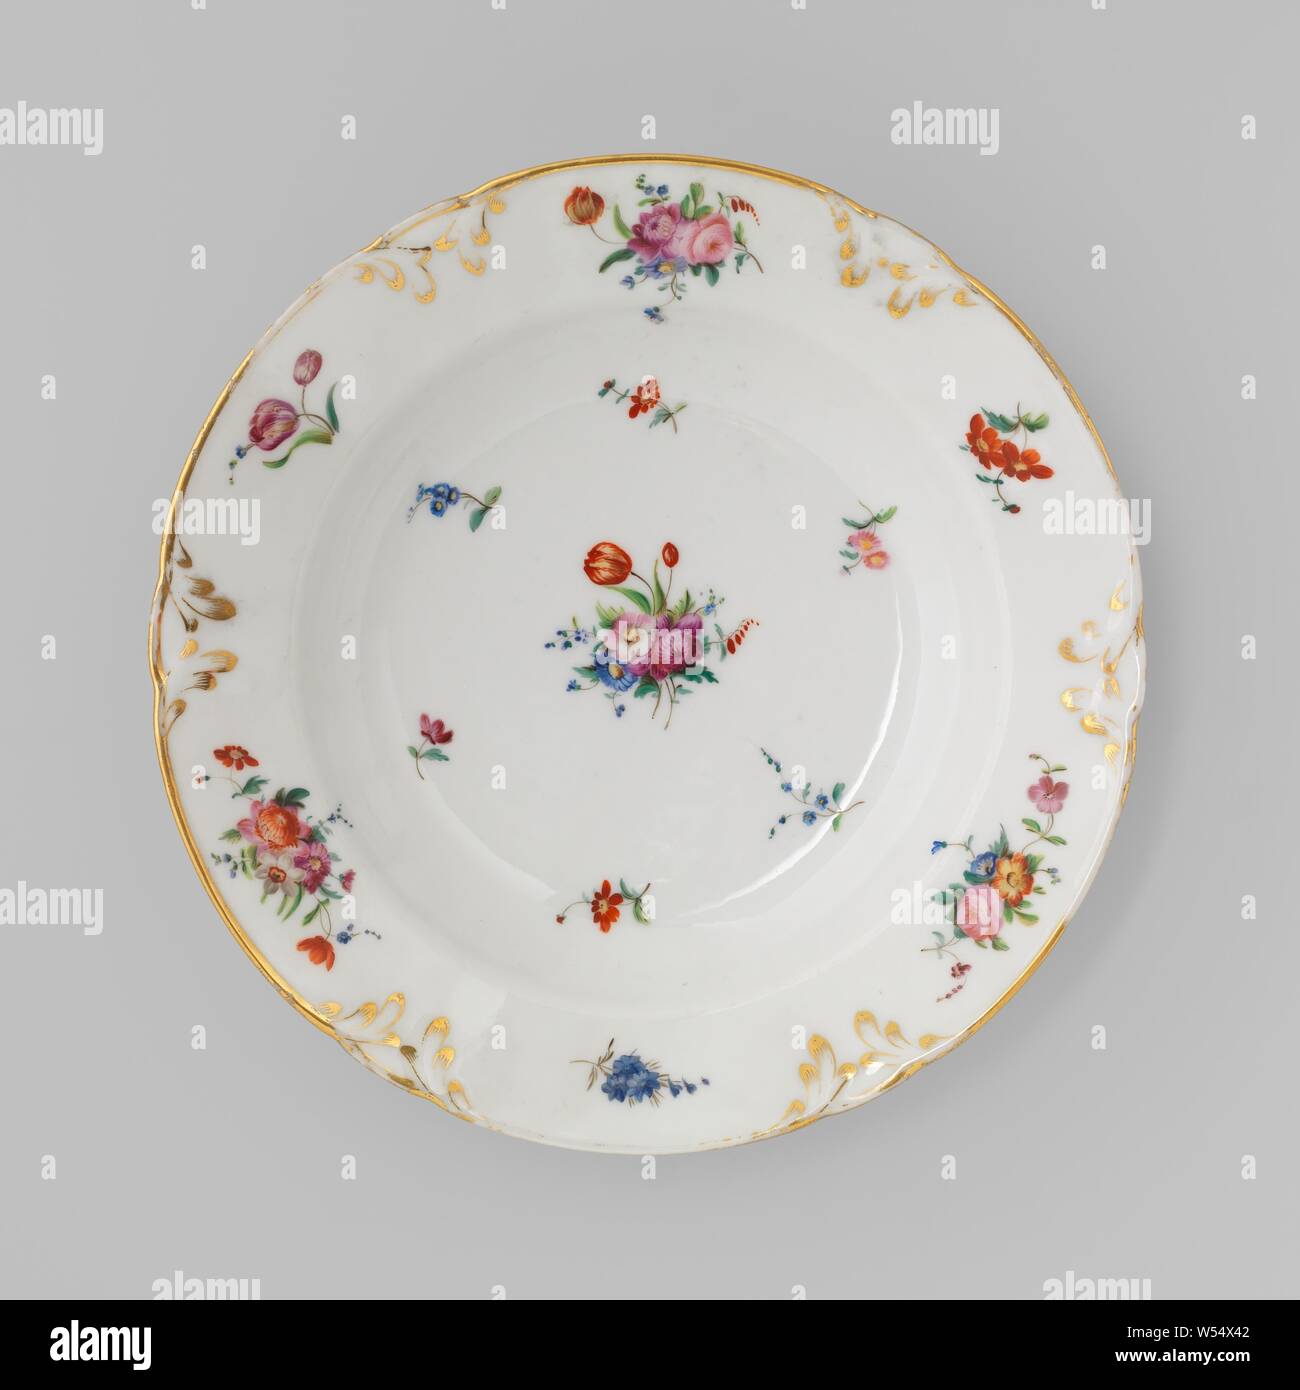 Plate with bouquets and flower sprays, Deep porcelain plate with a lobed edge, painted on the glaze in blue, red, pink, green, yellow, purple, black and gold. On the flat bouquets of different flowers and scatter flowers. From the lobed, golden edge, modeled leaf vines in relief, set with gold. Bouquets in between. Three proen on the bottom. Marked on the bottom with 'DENUELLE / Boulevard St. Denis 18 / à Paris'., Fabriek Dominique Denuelle, Paris, c. 1839, porcelain (material), glaze, gold (metal), vitrification, h 4.4 cm d 23.7 cm d 13.7 cm Stock Photo